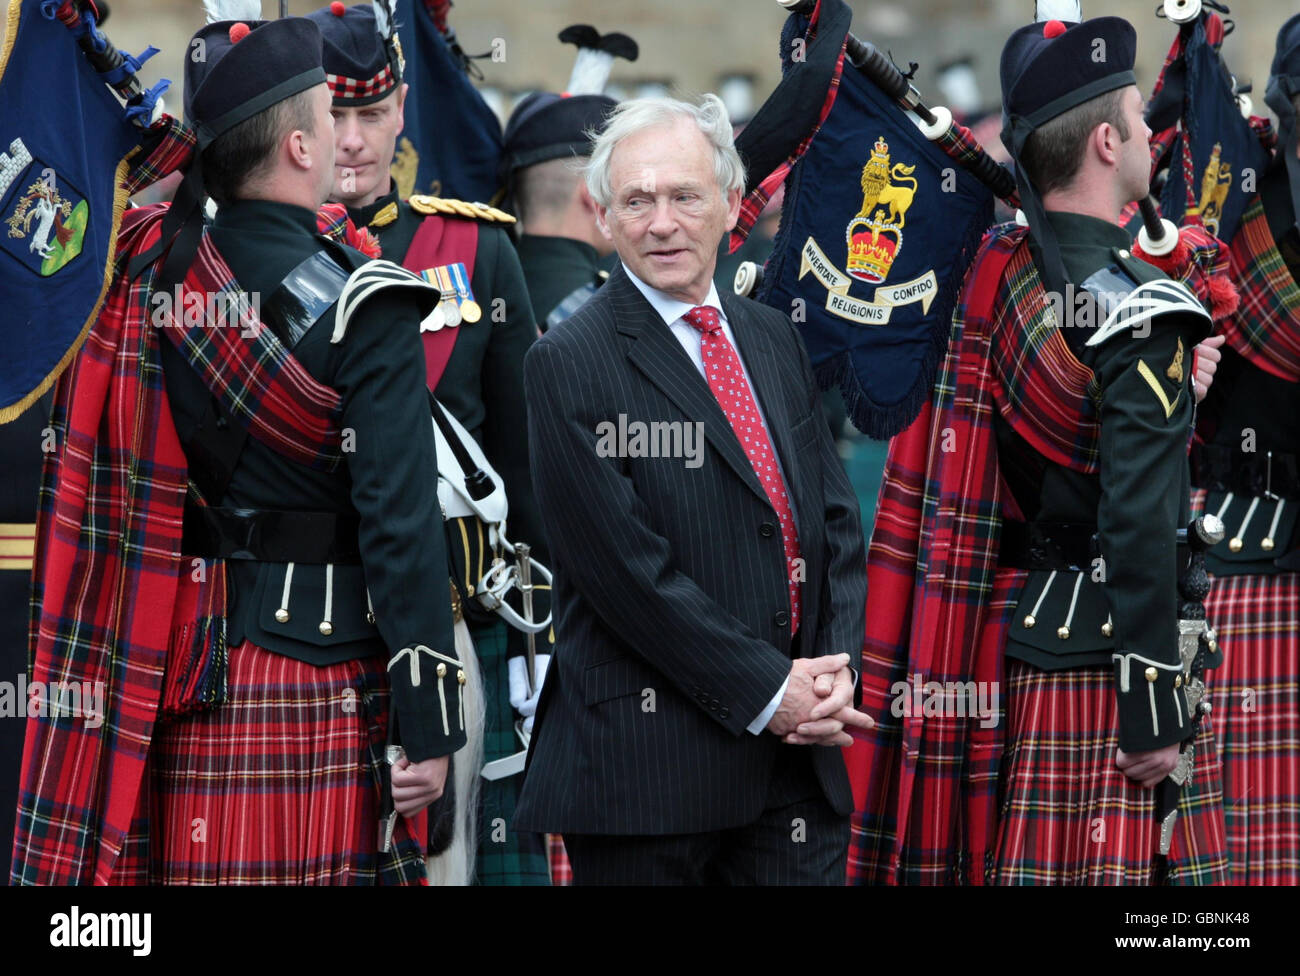 George Reid, Lord High Commissioner arrives at the Palace of Holyroodhouse to inspect a Guard of Honour mounted by The Band of The Royal Regiment, palace Forecourt, Edinburgh. Stock Photo